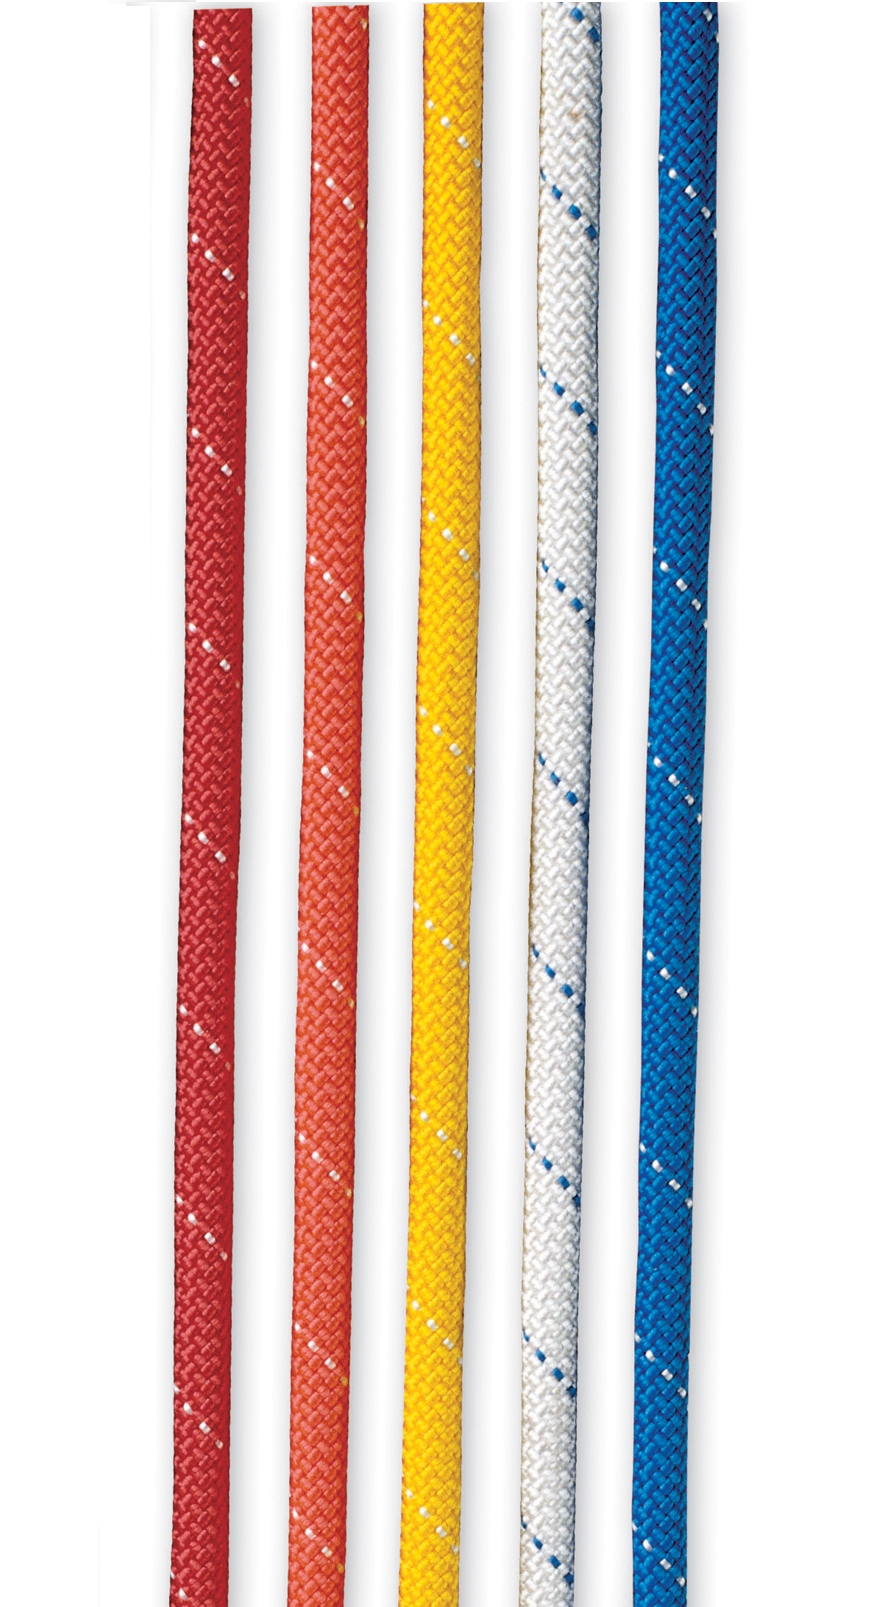 StaticPro - NFPA Kernmantle HTP Rope